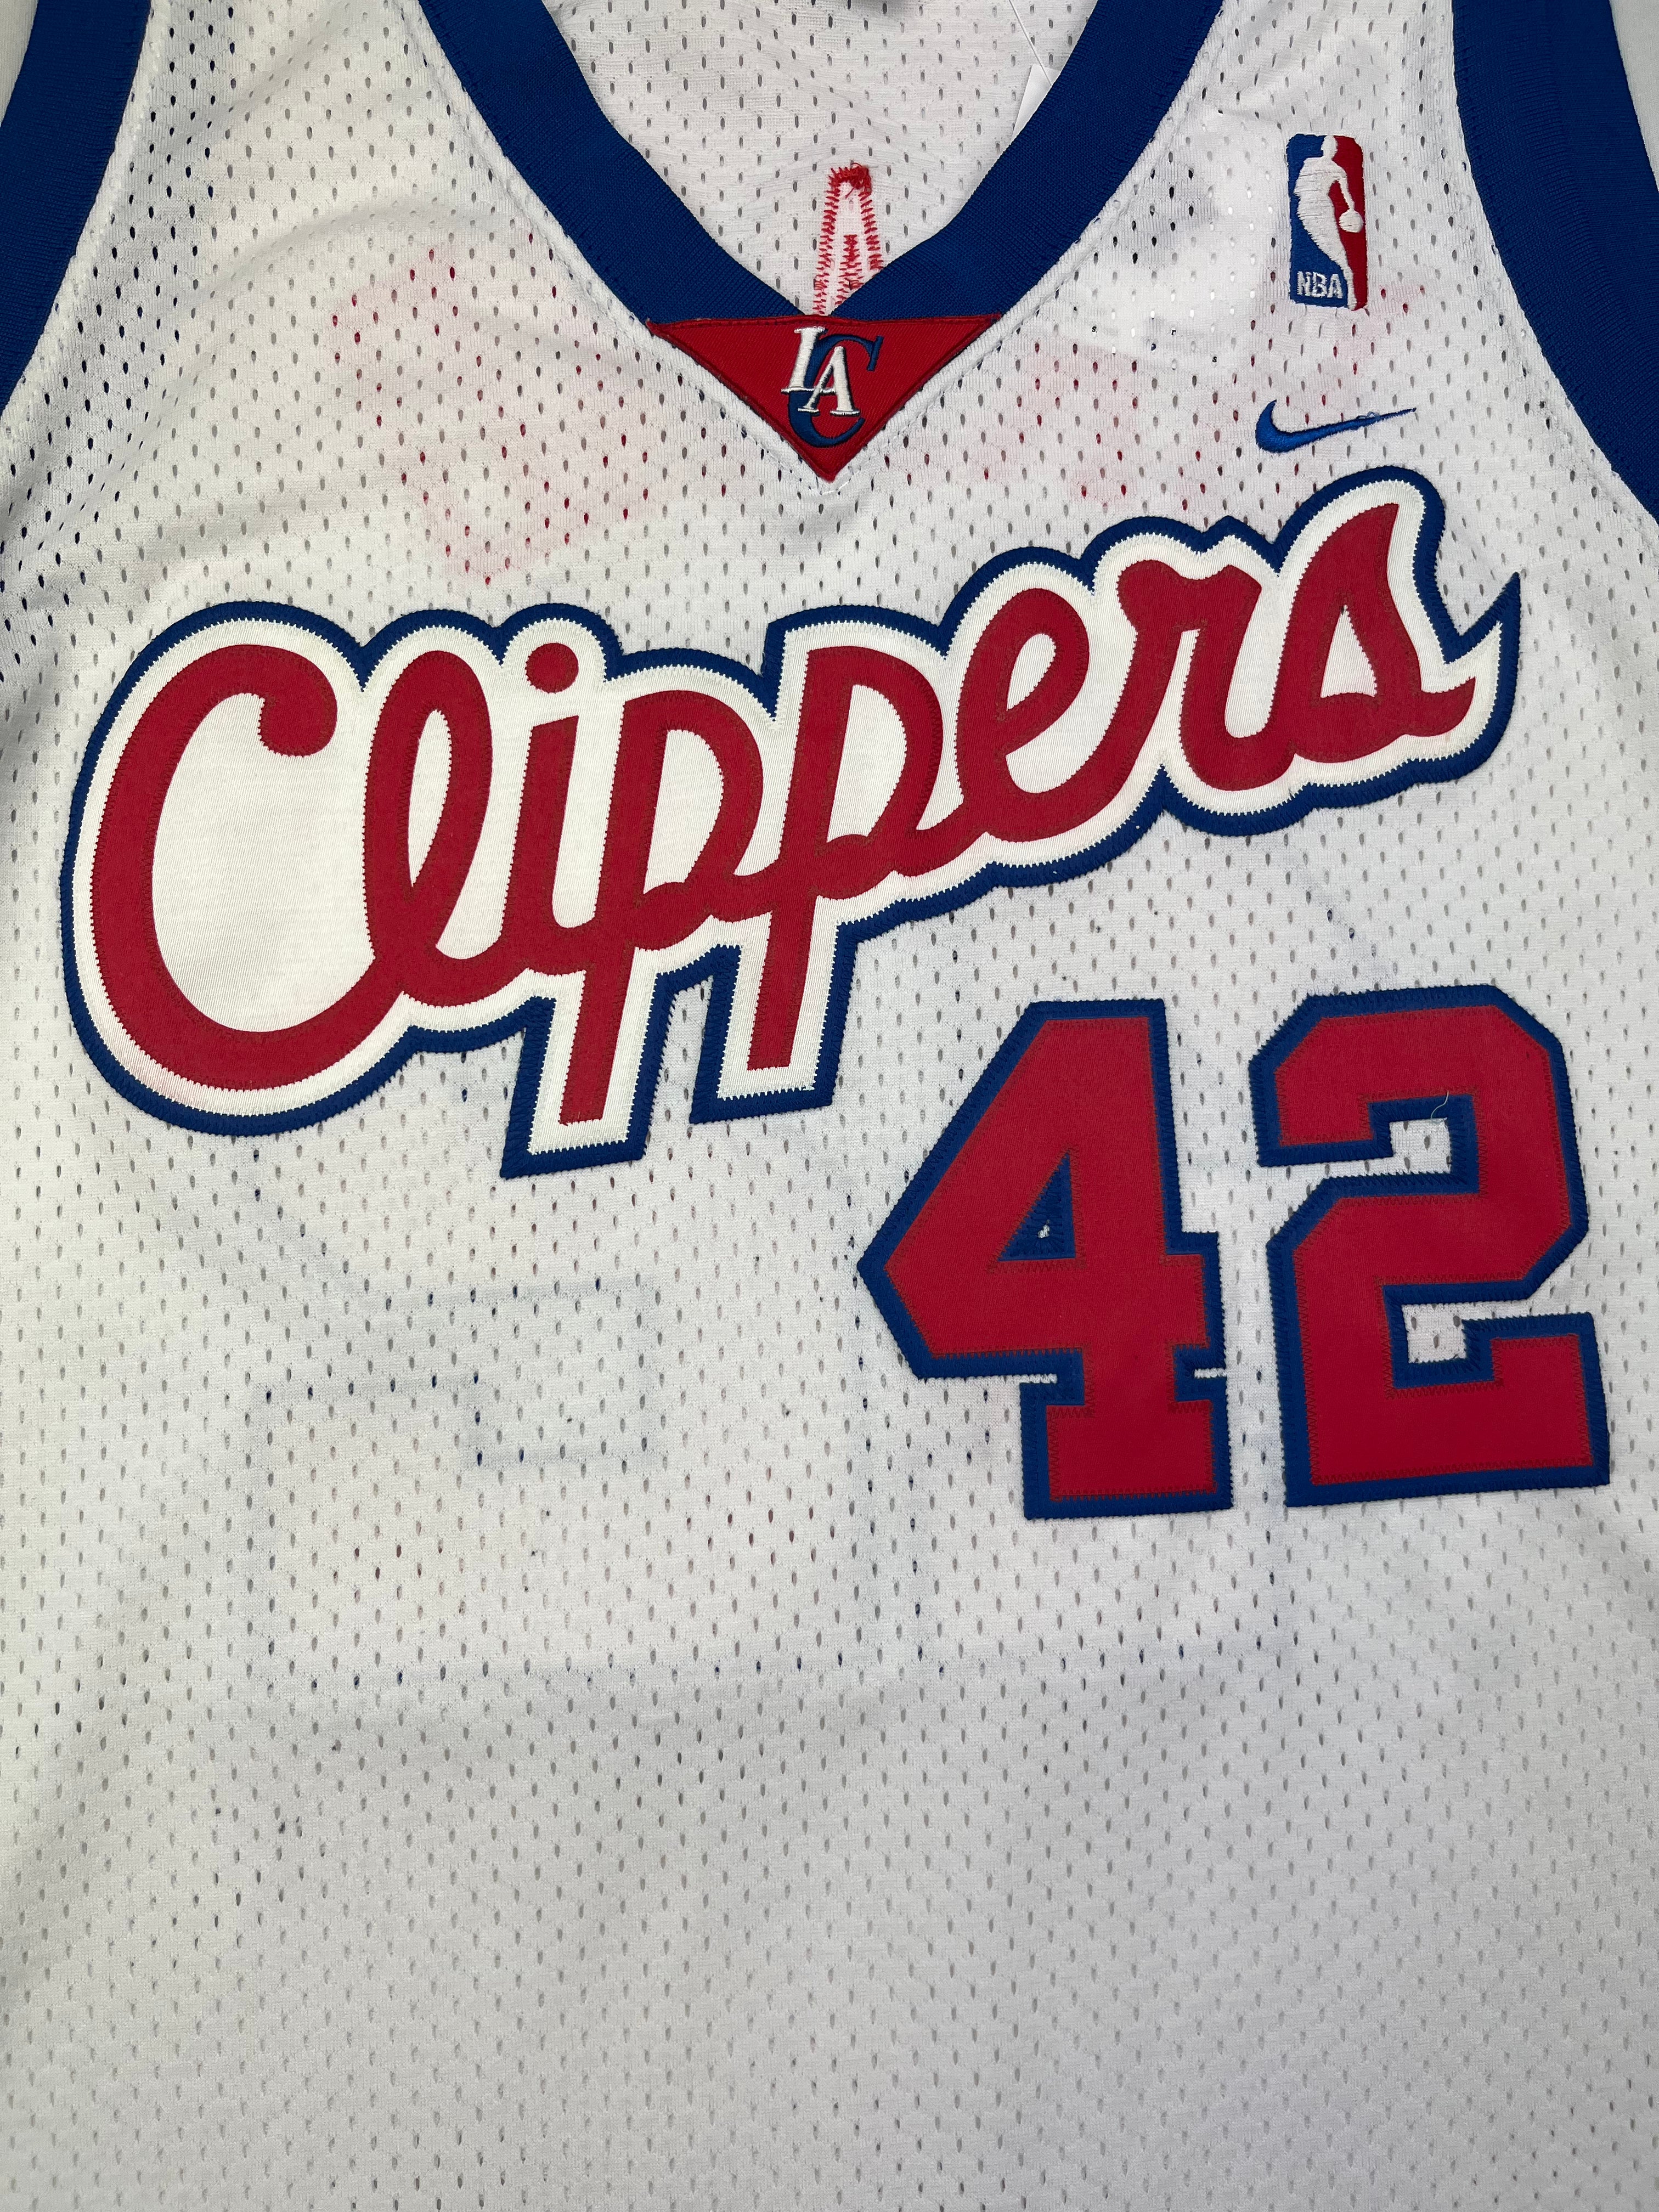 2002-06 Los Angeles Clippers Nike Home Jersey Brand #42 (XL) 9/10